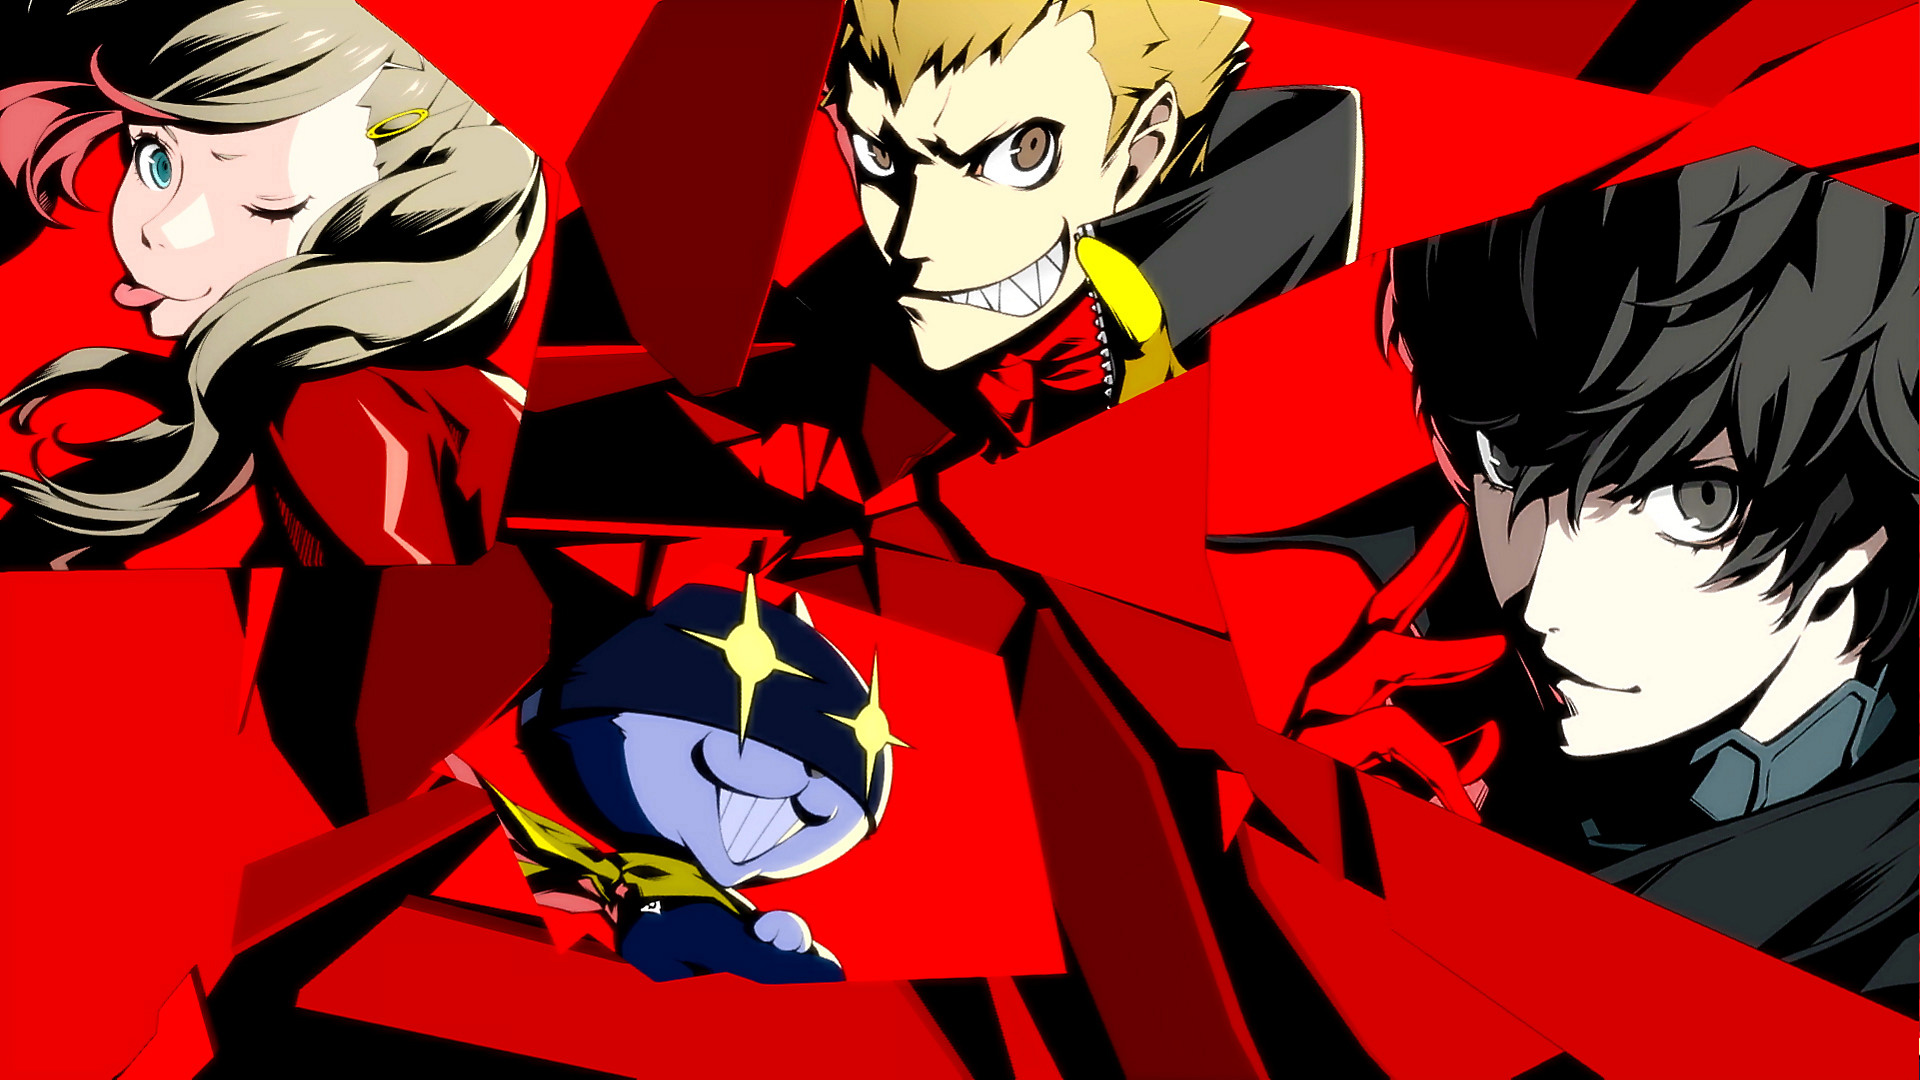 Persona 5 Royal Tips And Tricks For Leveling Up Combat Using The Grappling Hook Raising Stats Confidants Palaces Fast Travel And More The Mako Reactor